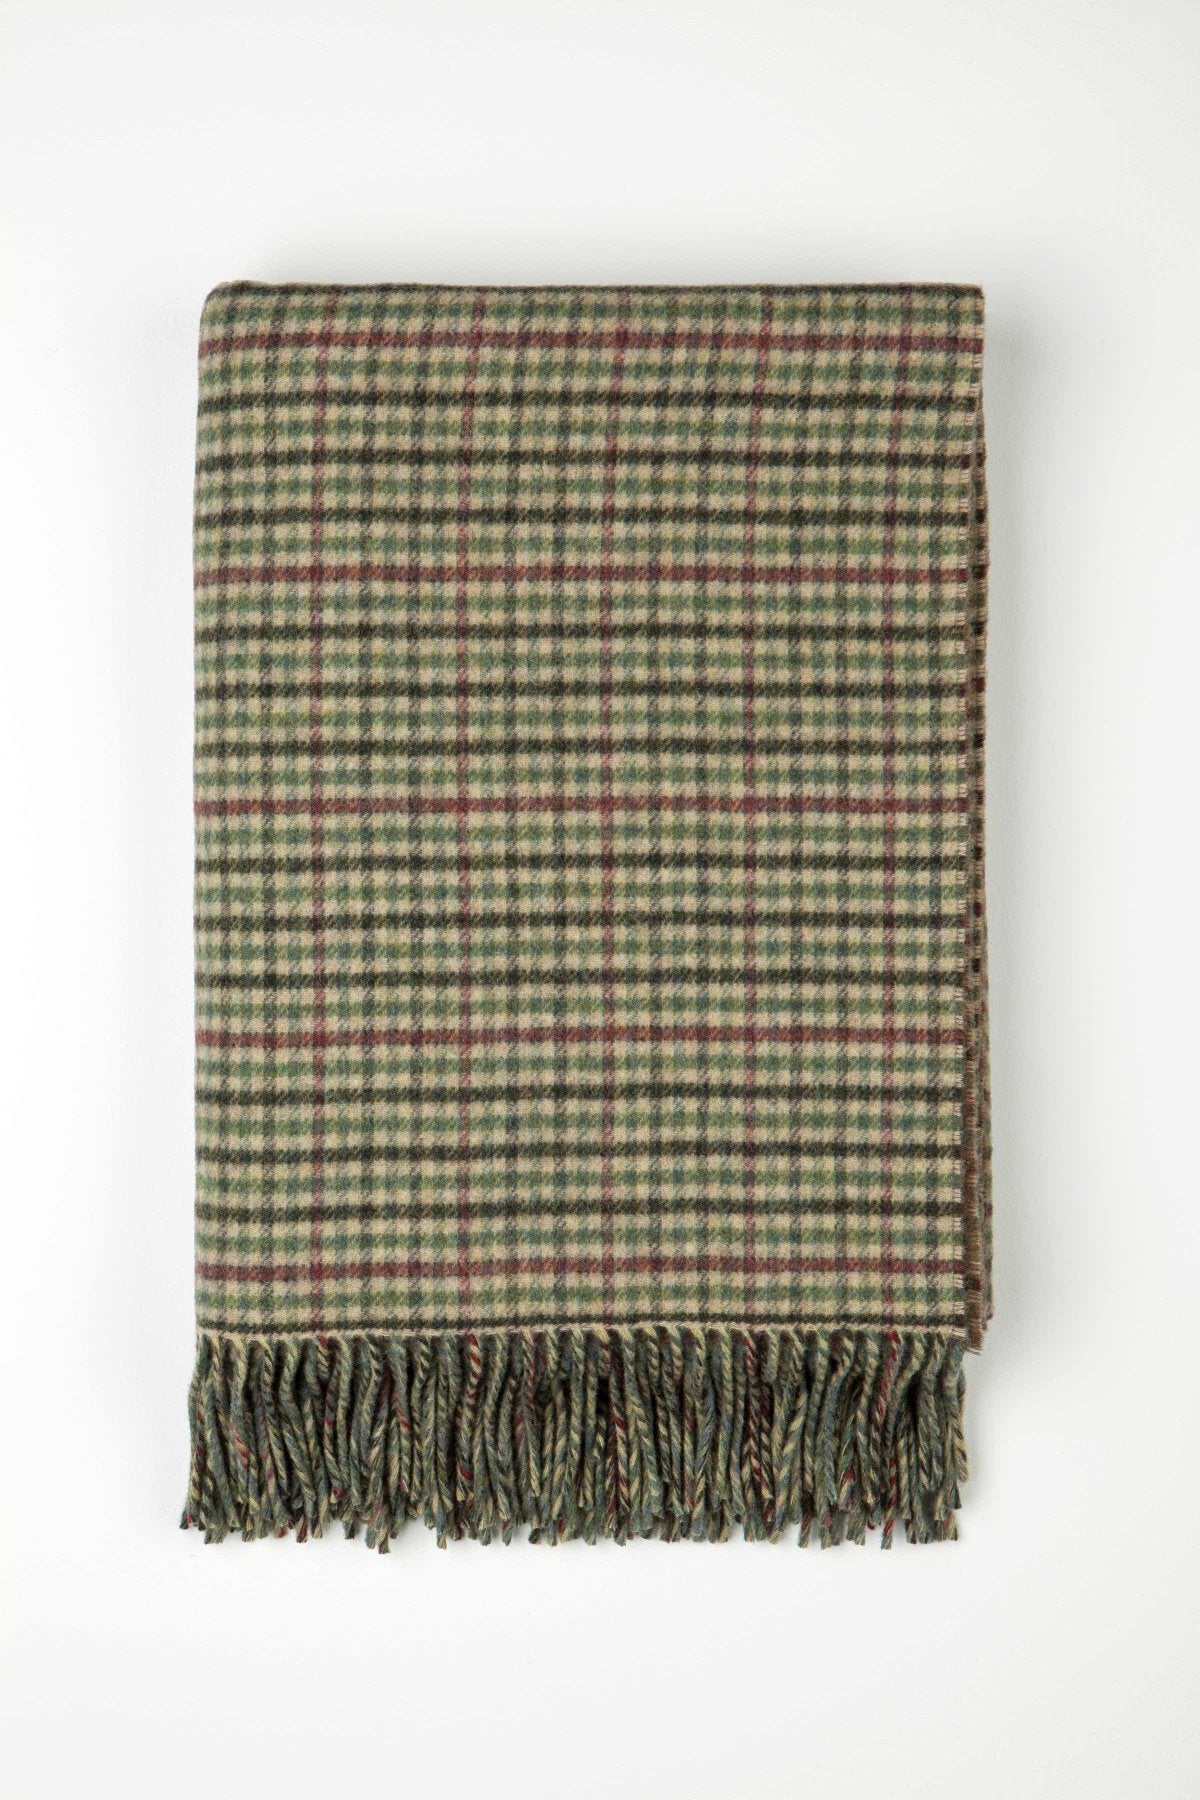 Lambswool Double Face Check Throw | Lossiemouth